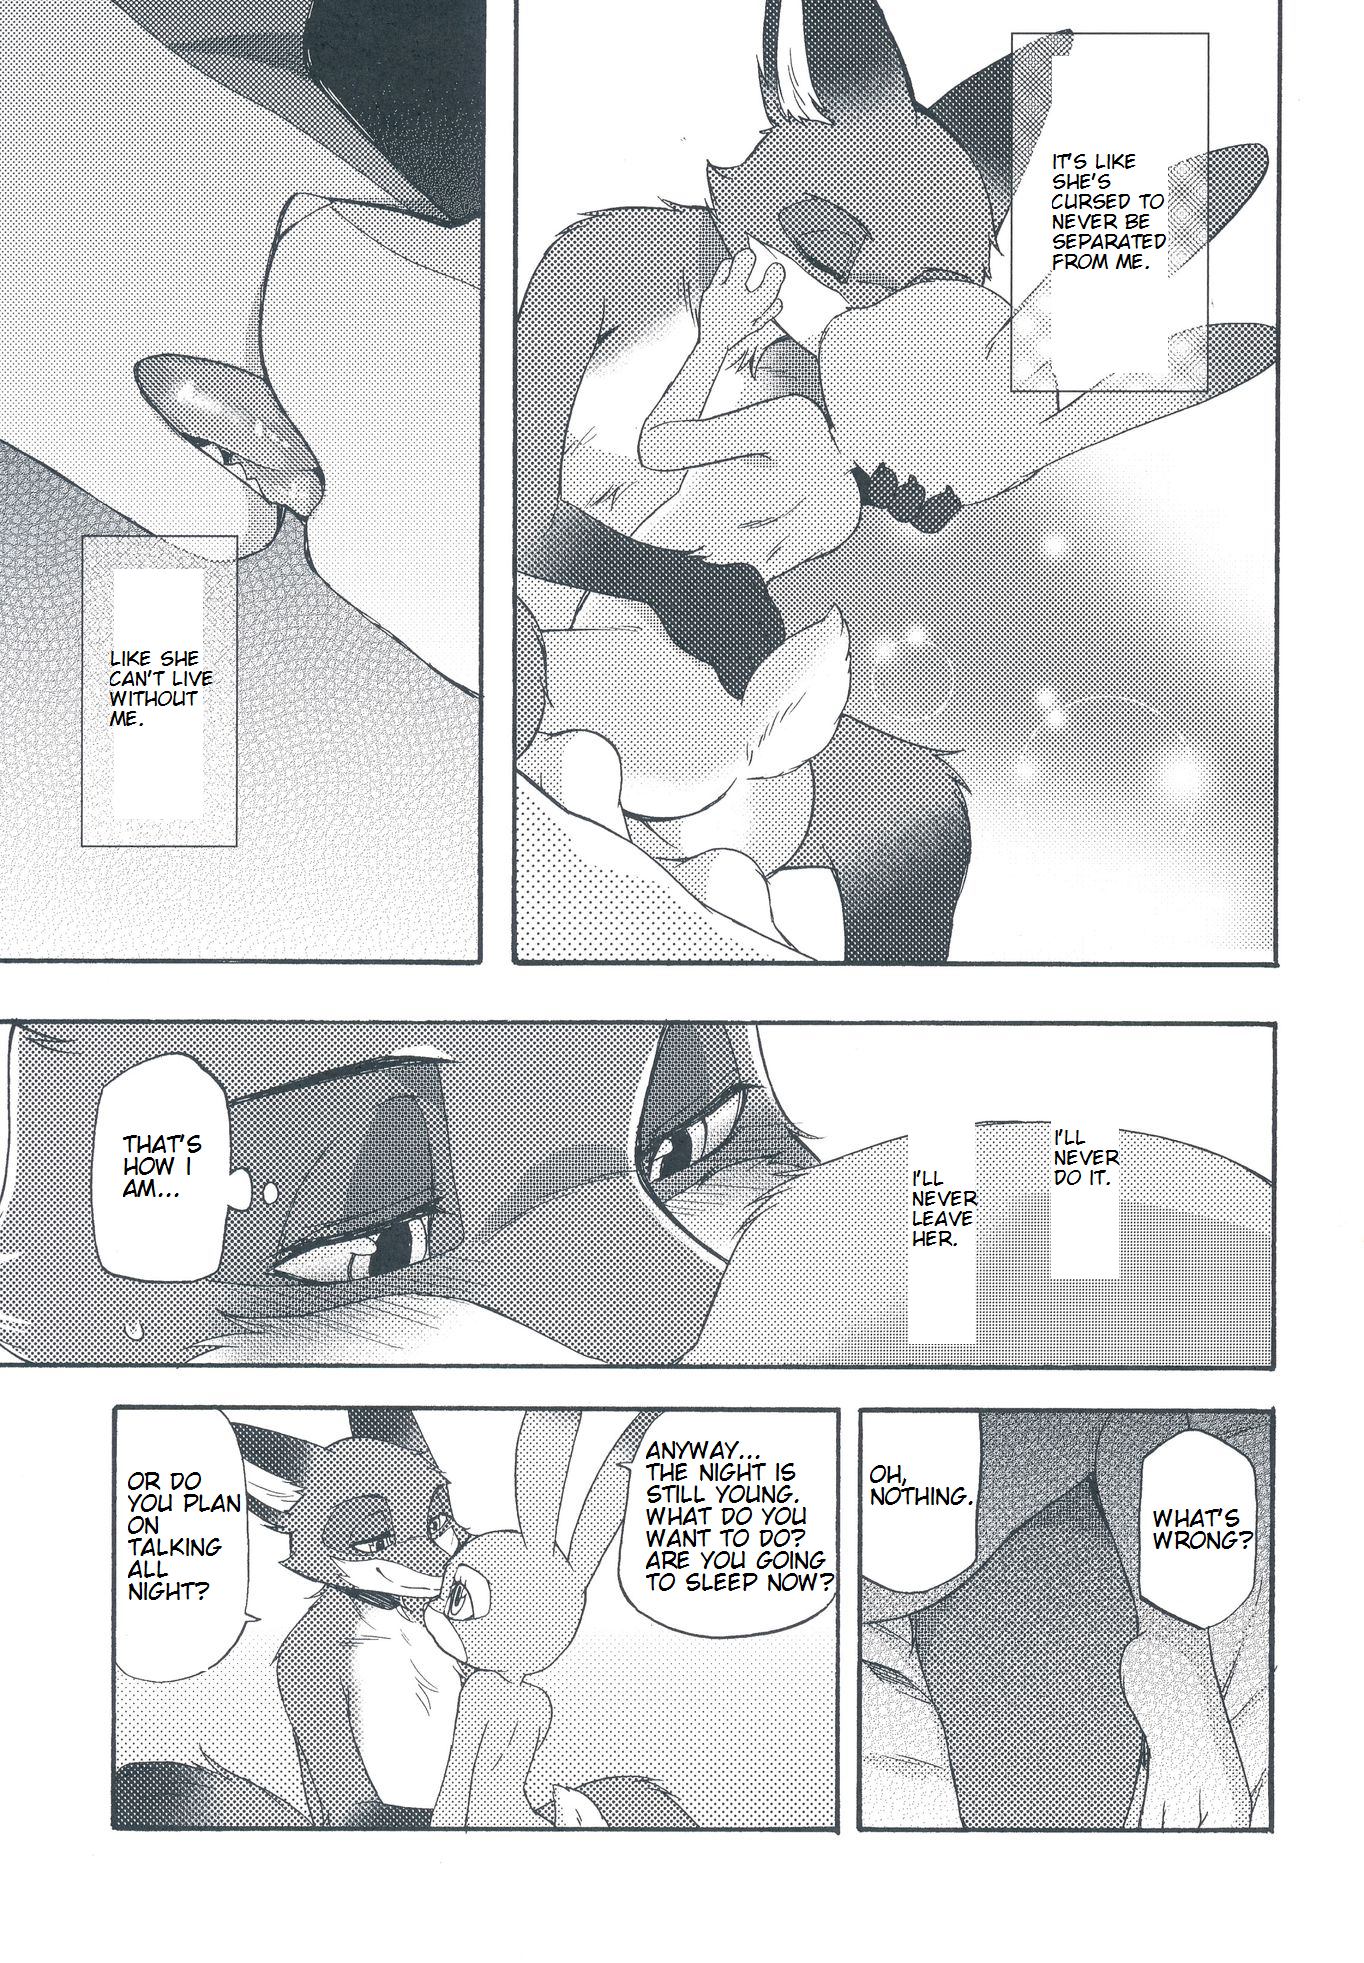 Carrots-For-One-ENG-page039--Gotofap.tk--47110705.png